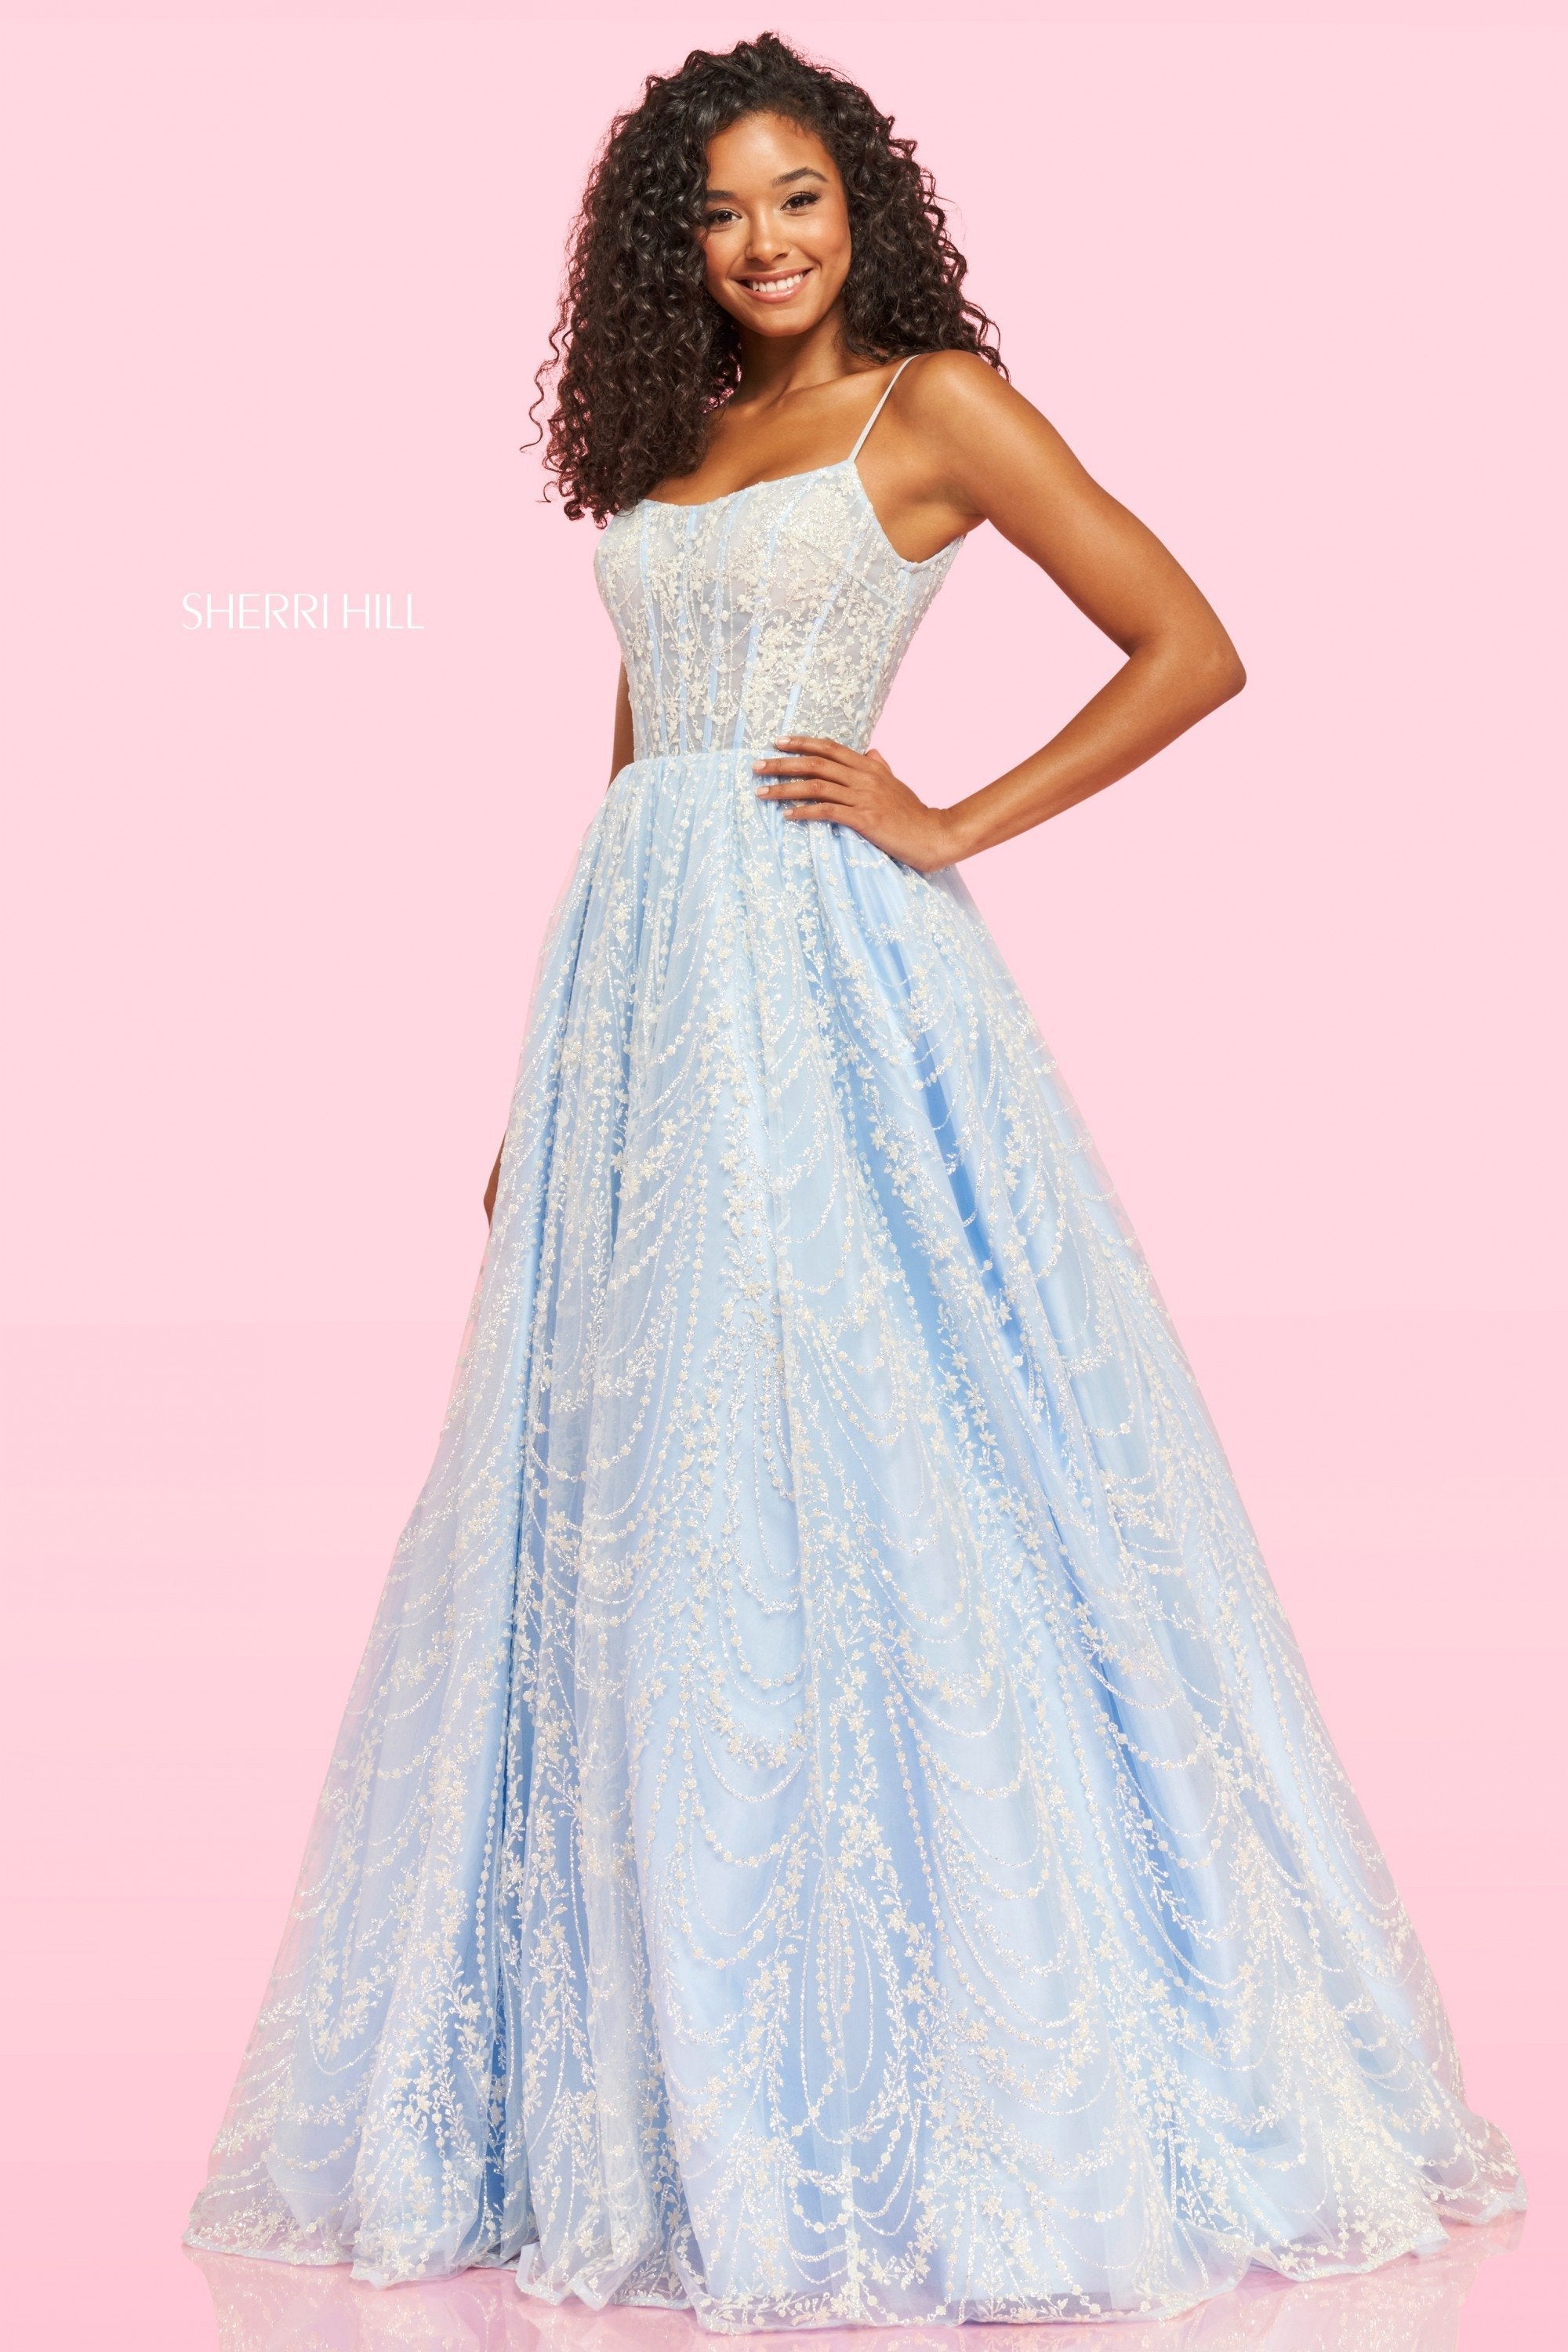 Sherri Hill 54209 dress images in these colors: Light Blue, Ivory.